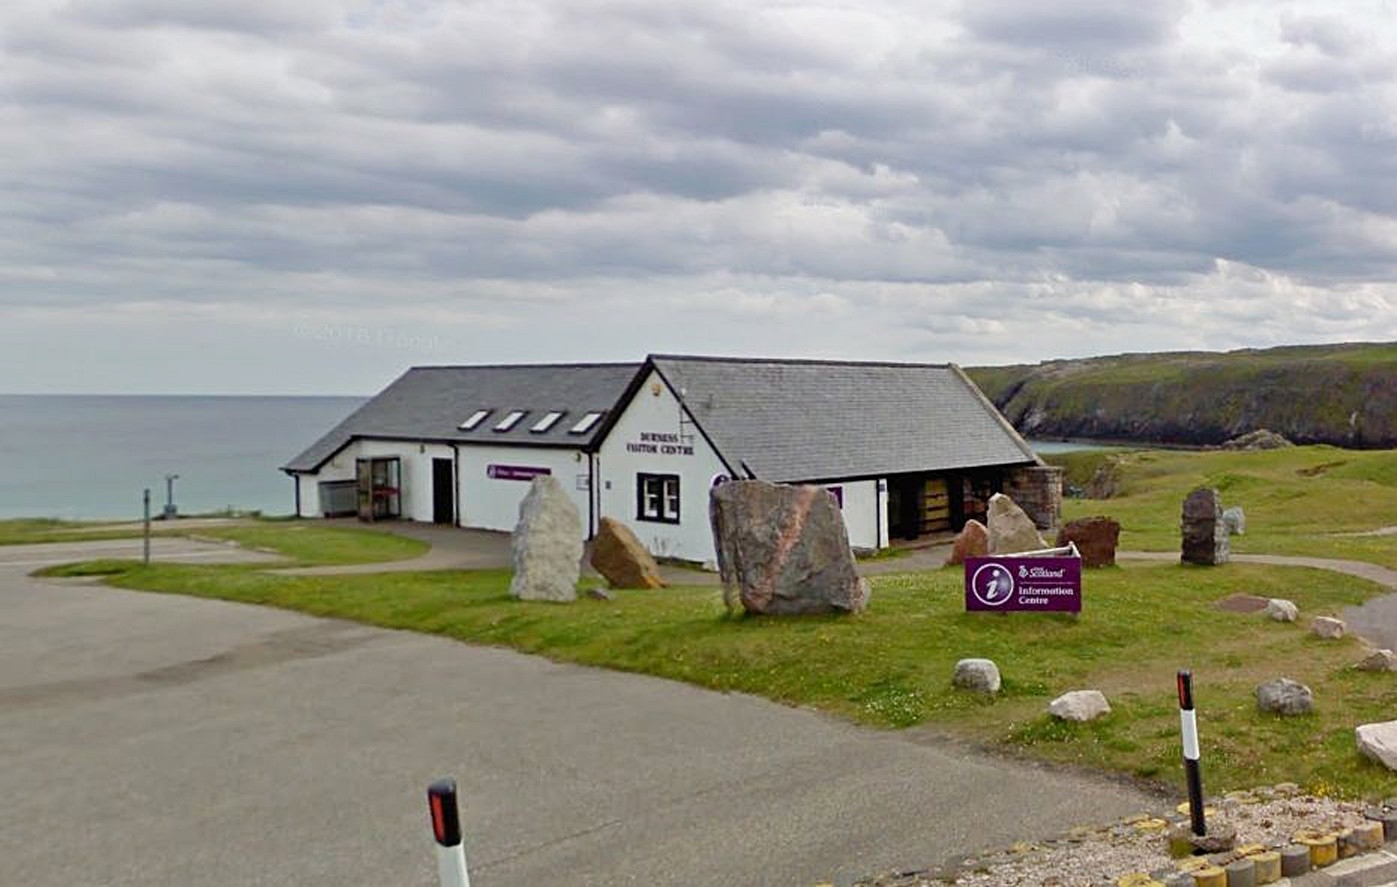 The venue is shared by tourist information and Highland Council's countryside ranger service.